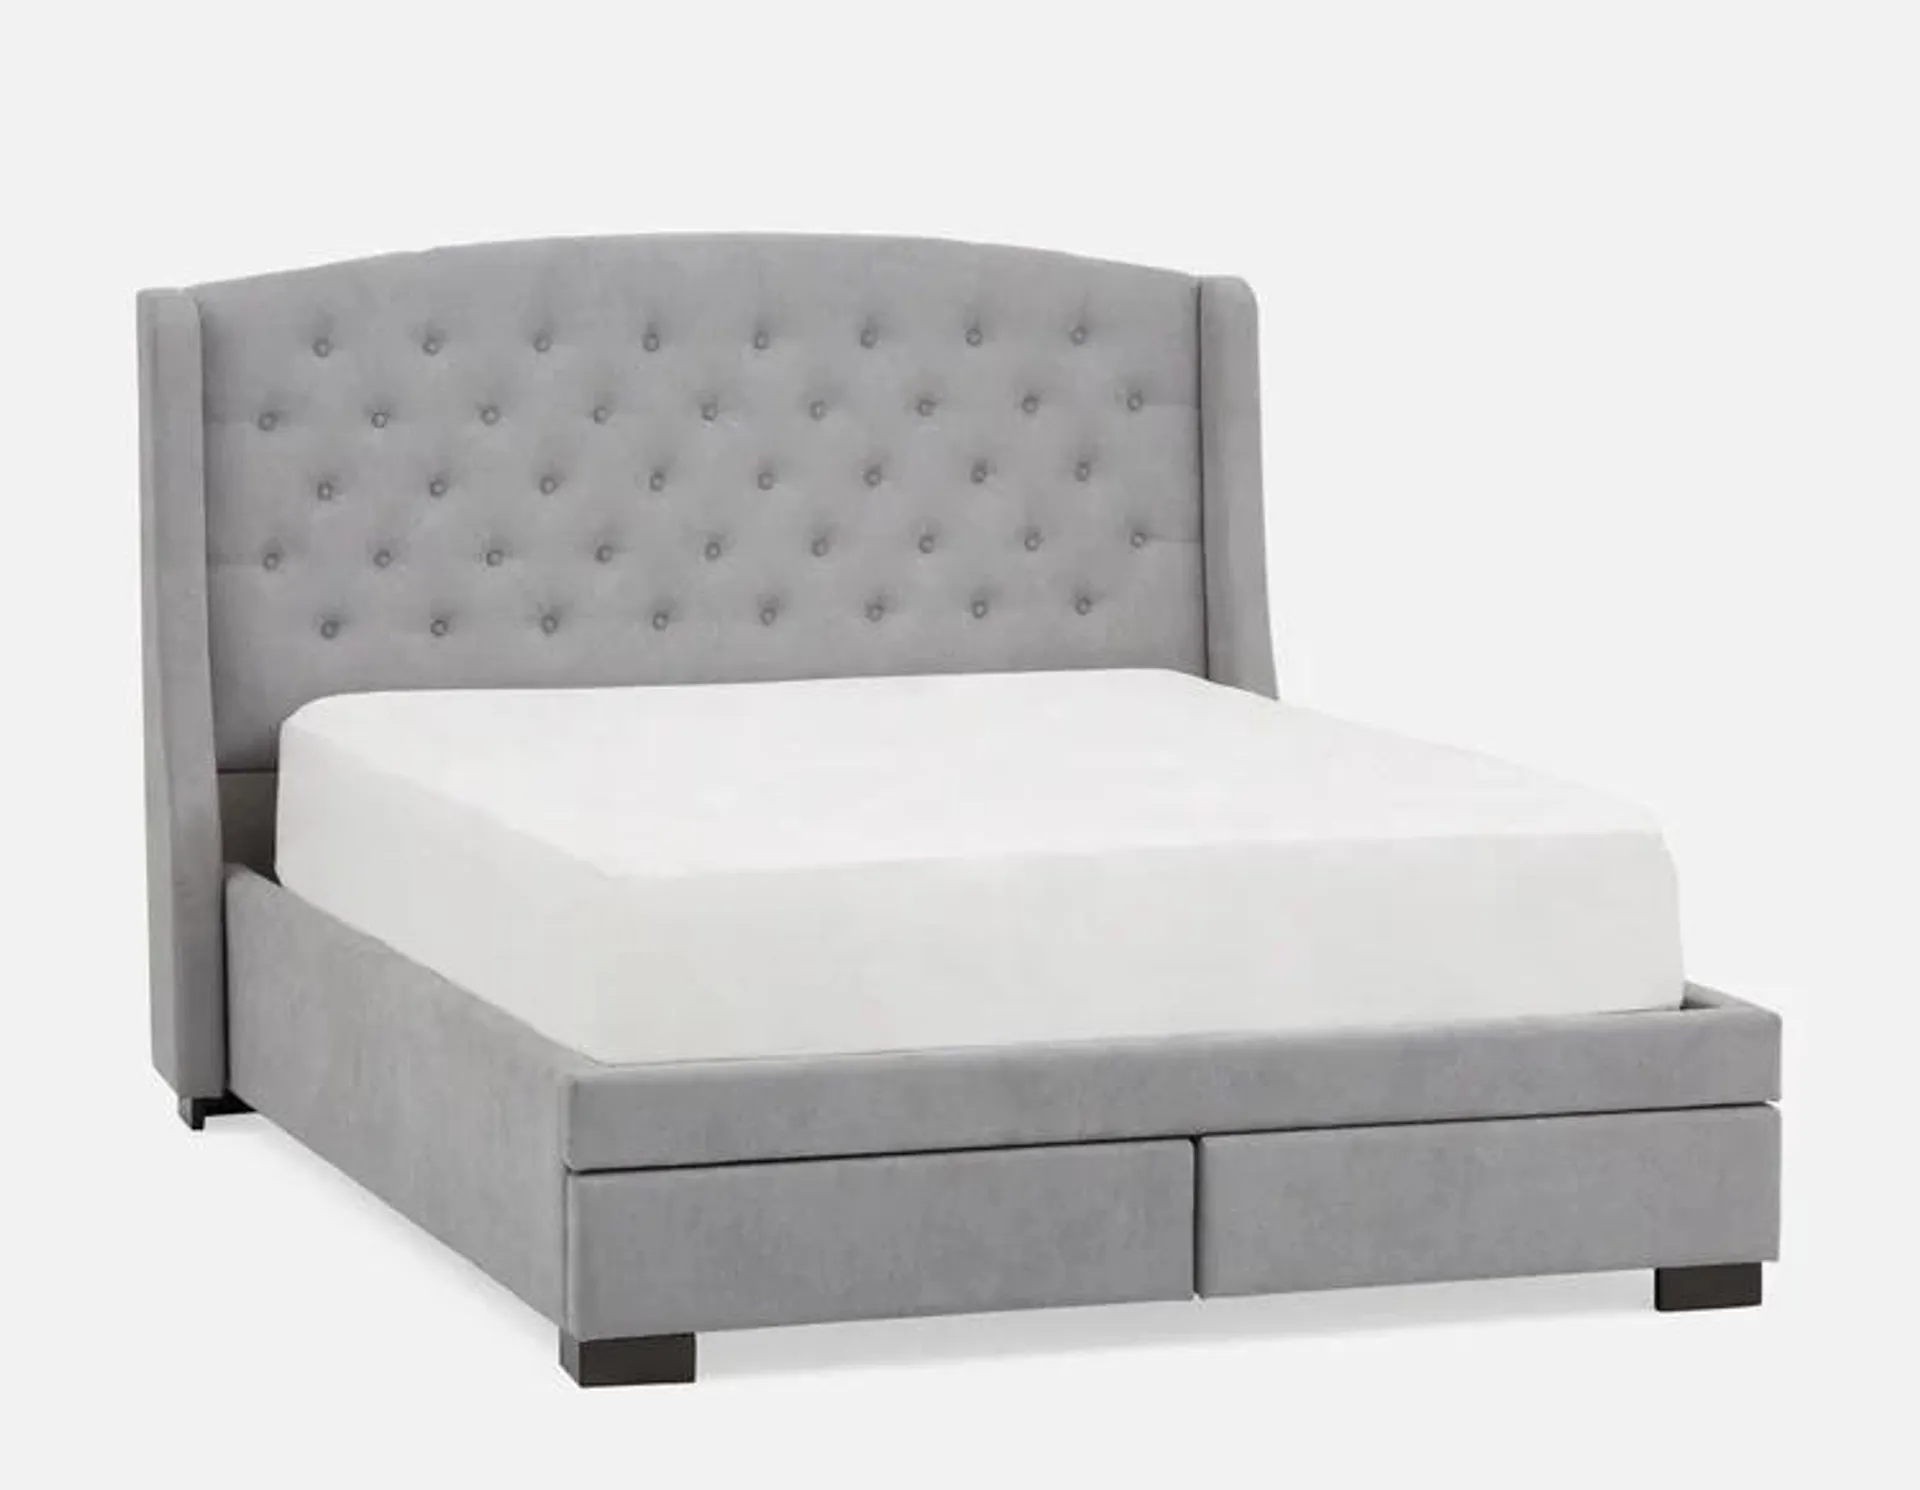 RAVEL tufted upholstered wingback queen size bed with storage